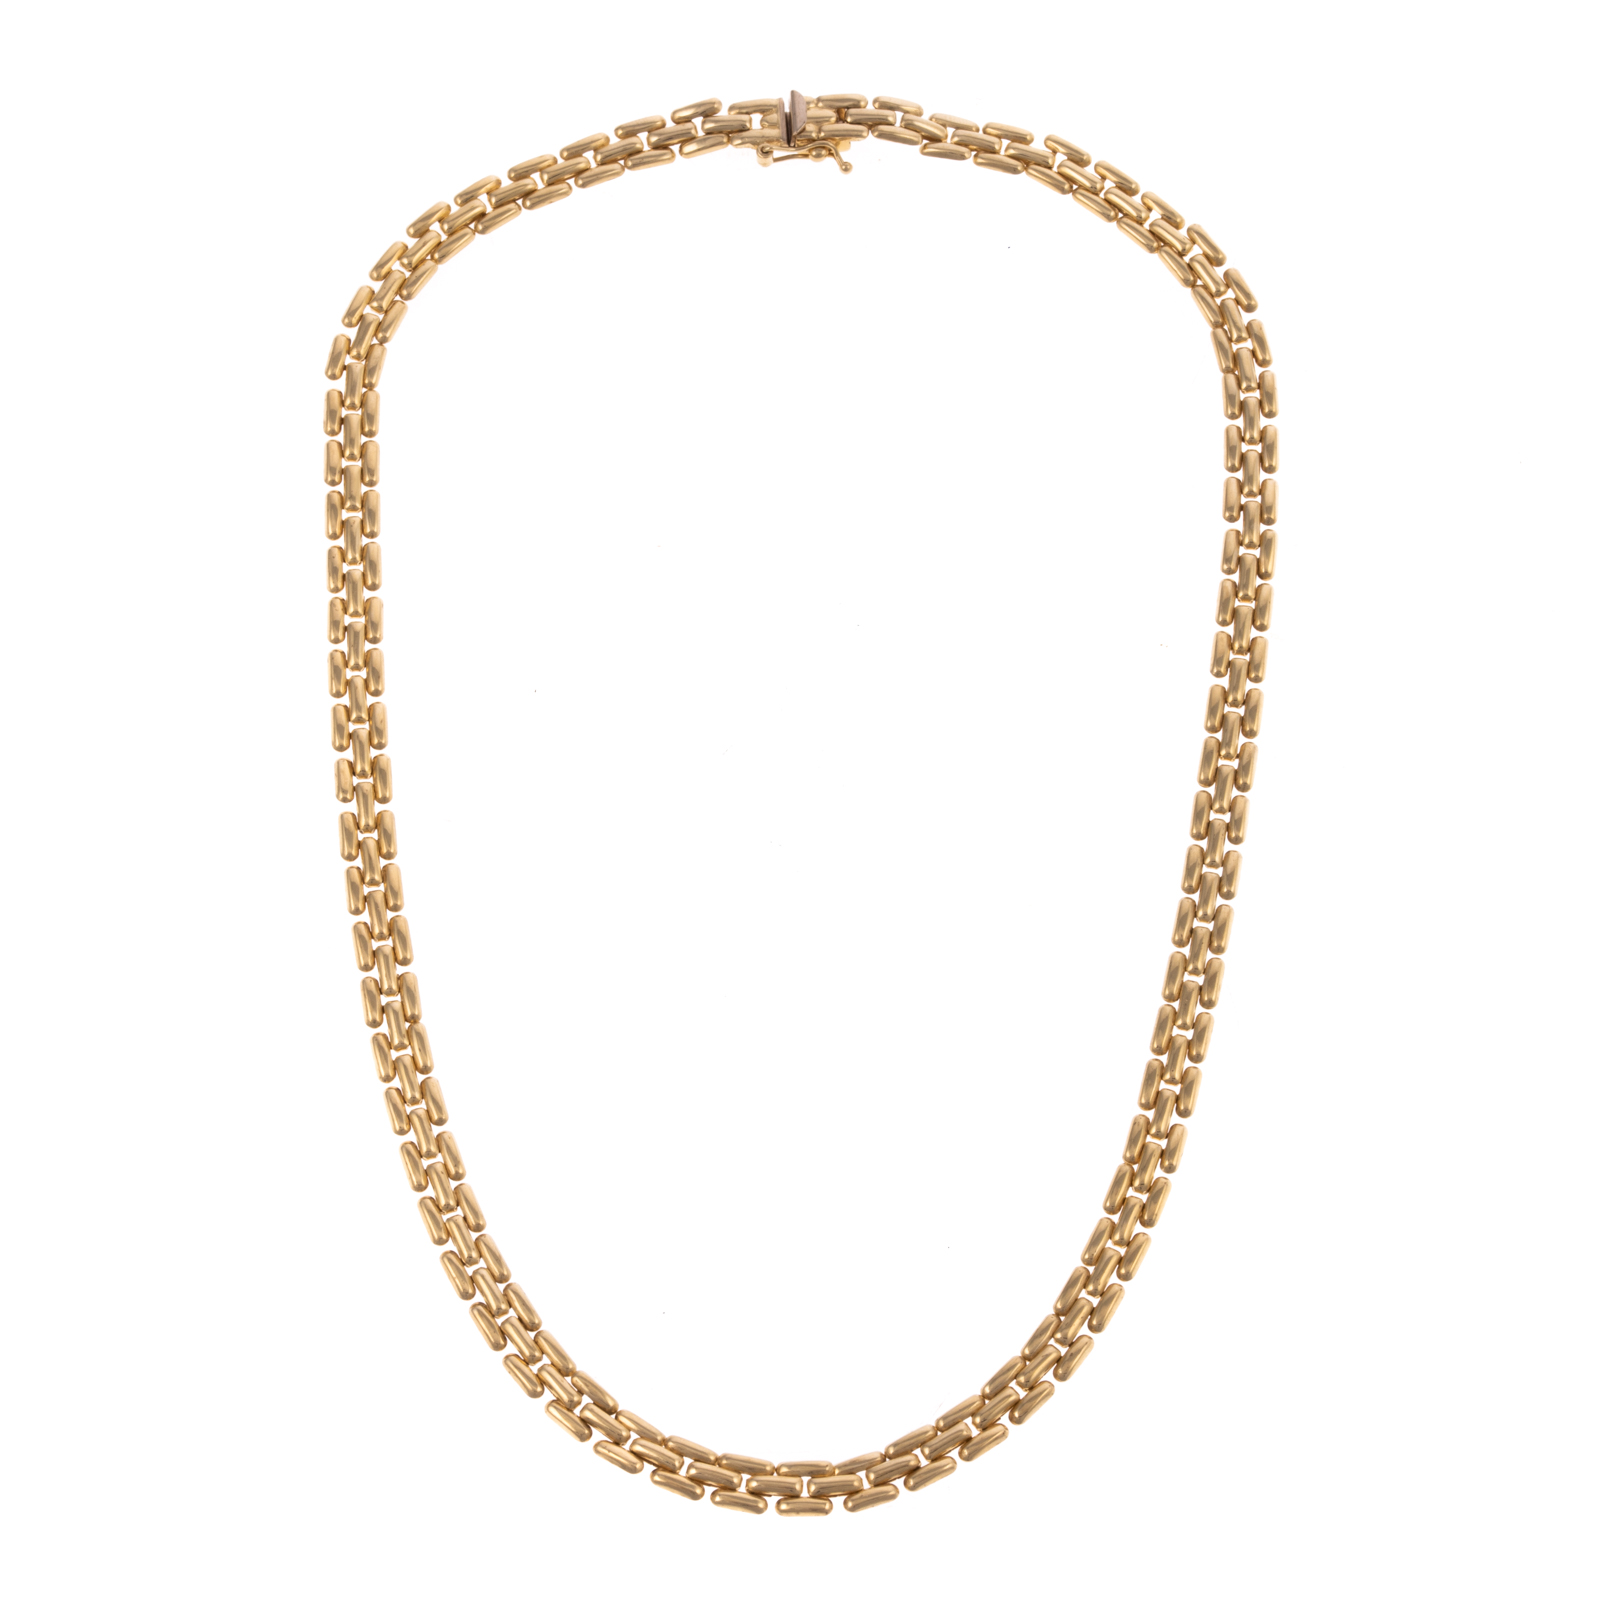 A PANTHER LINK NECKLACE IN 18K 288cc5